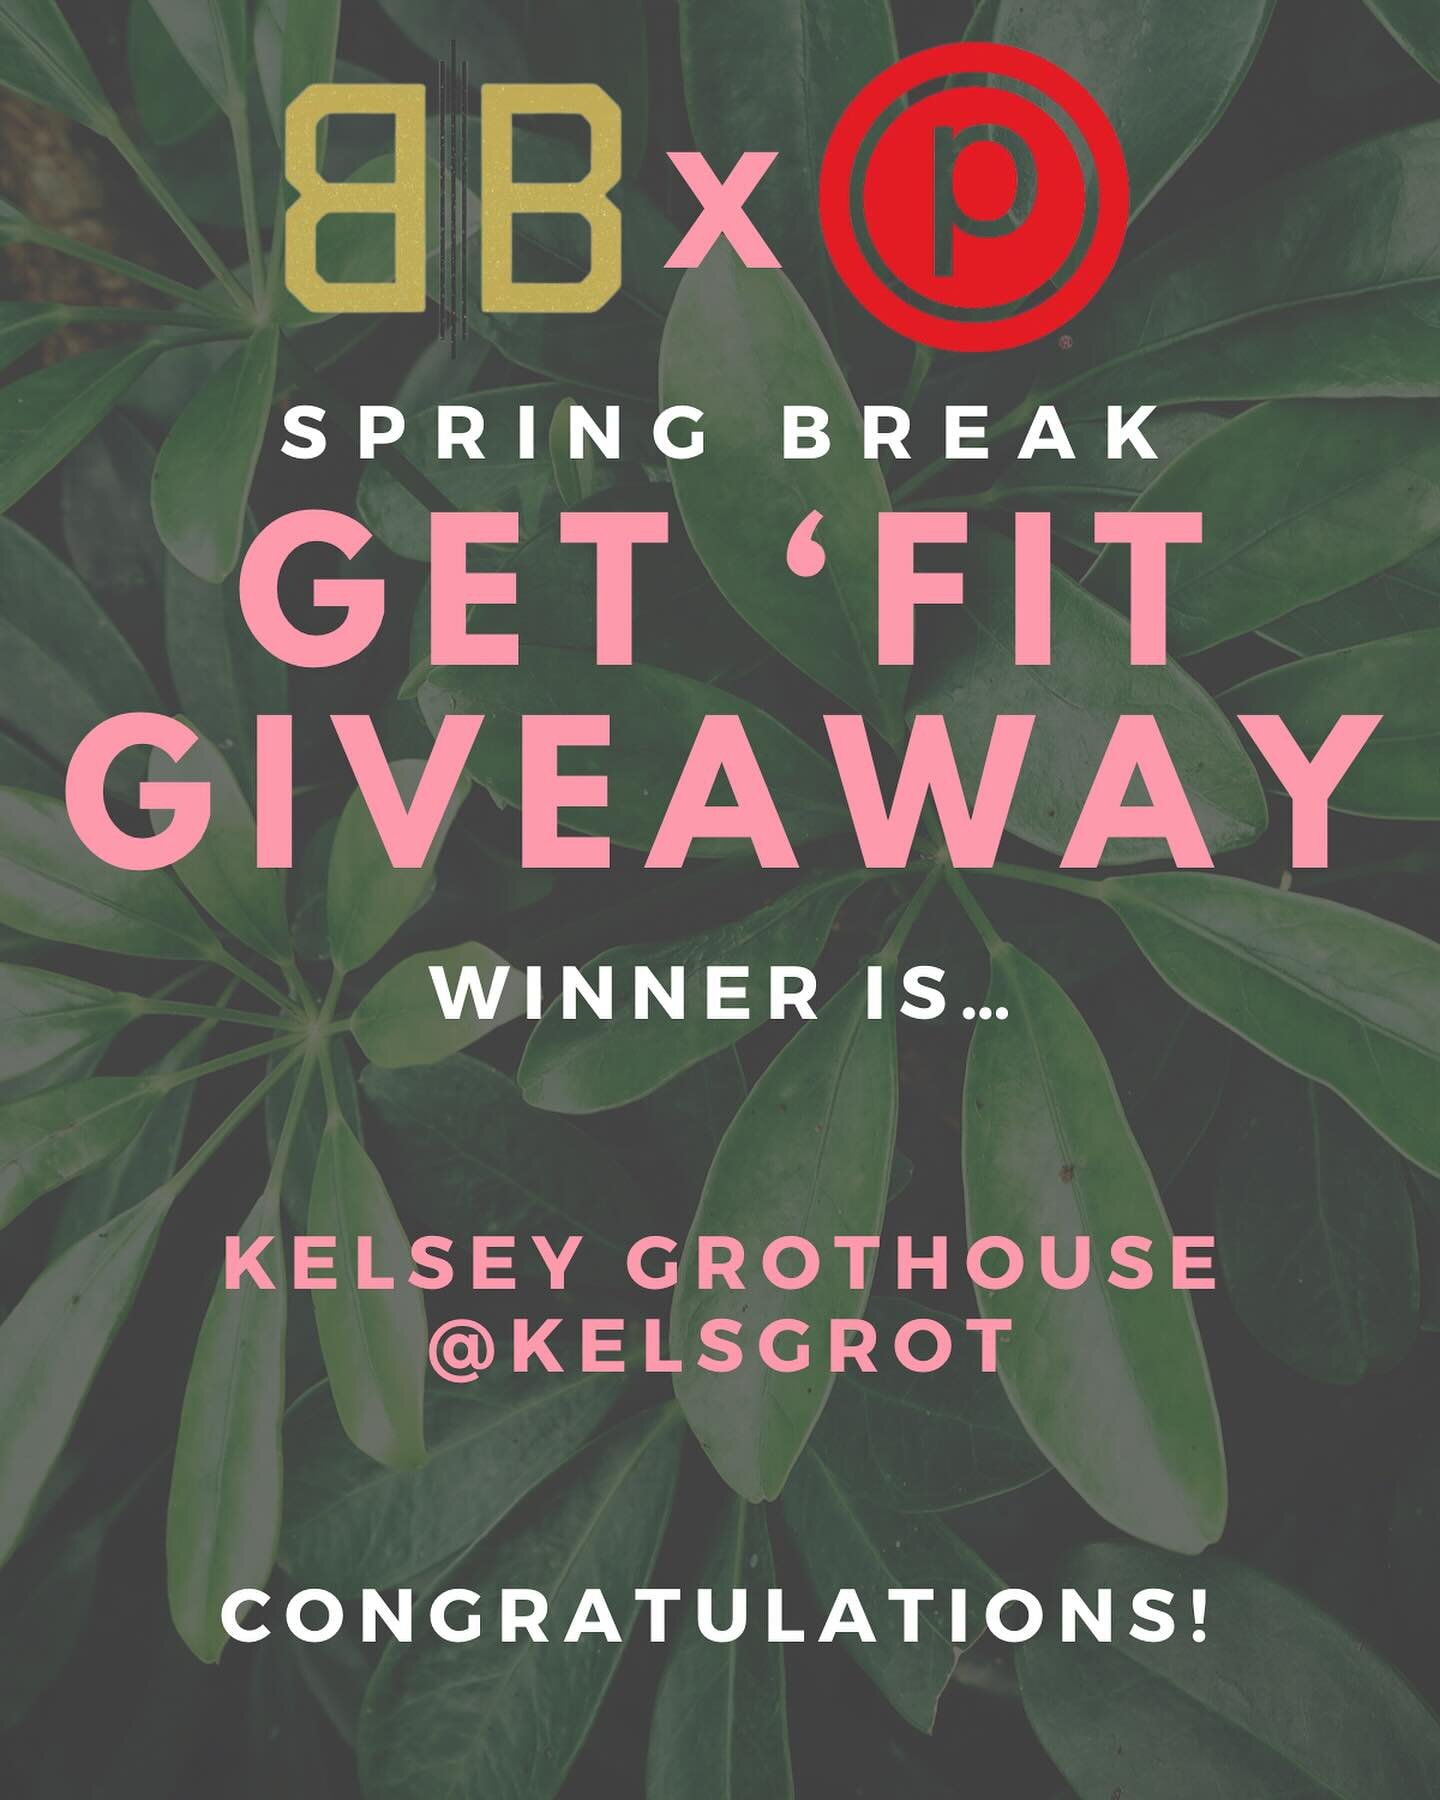 A huge THANK YOU to everyone who participated in @purebarreowensboro &amp; @byronandbarclay GET &lsquo;FIT GIVEAWAY! @kelsgrot you are the WINNER! 🙌
Stop by each shop to claim your prizes! 🎀